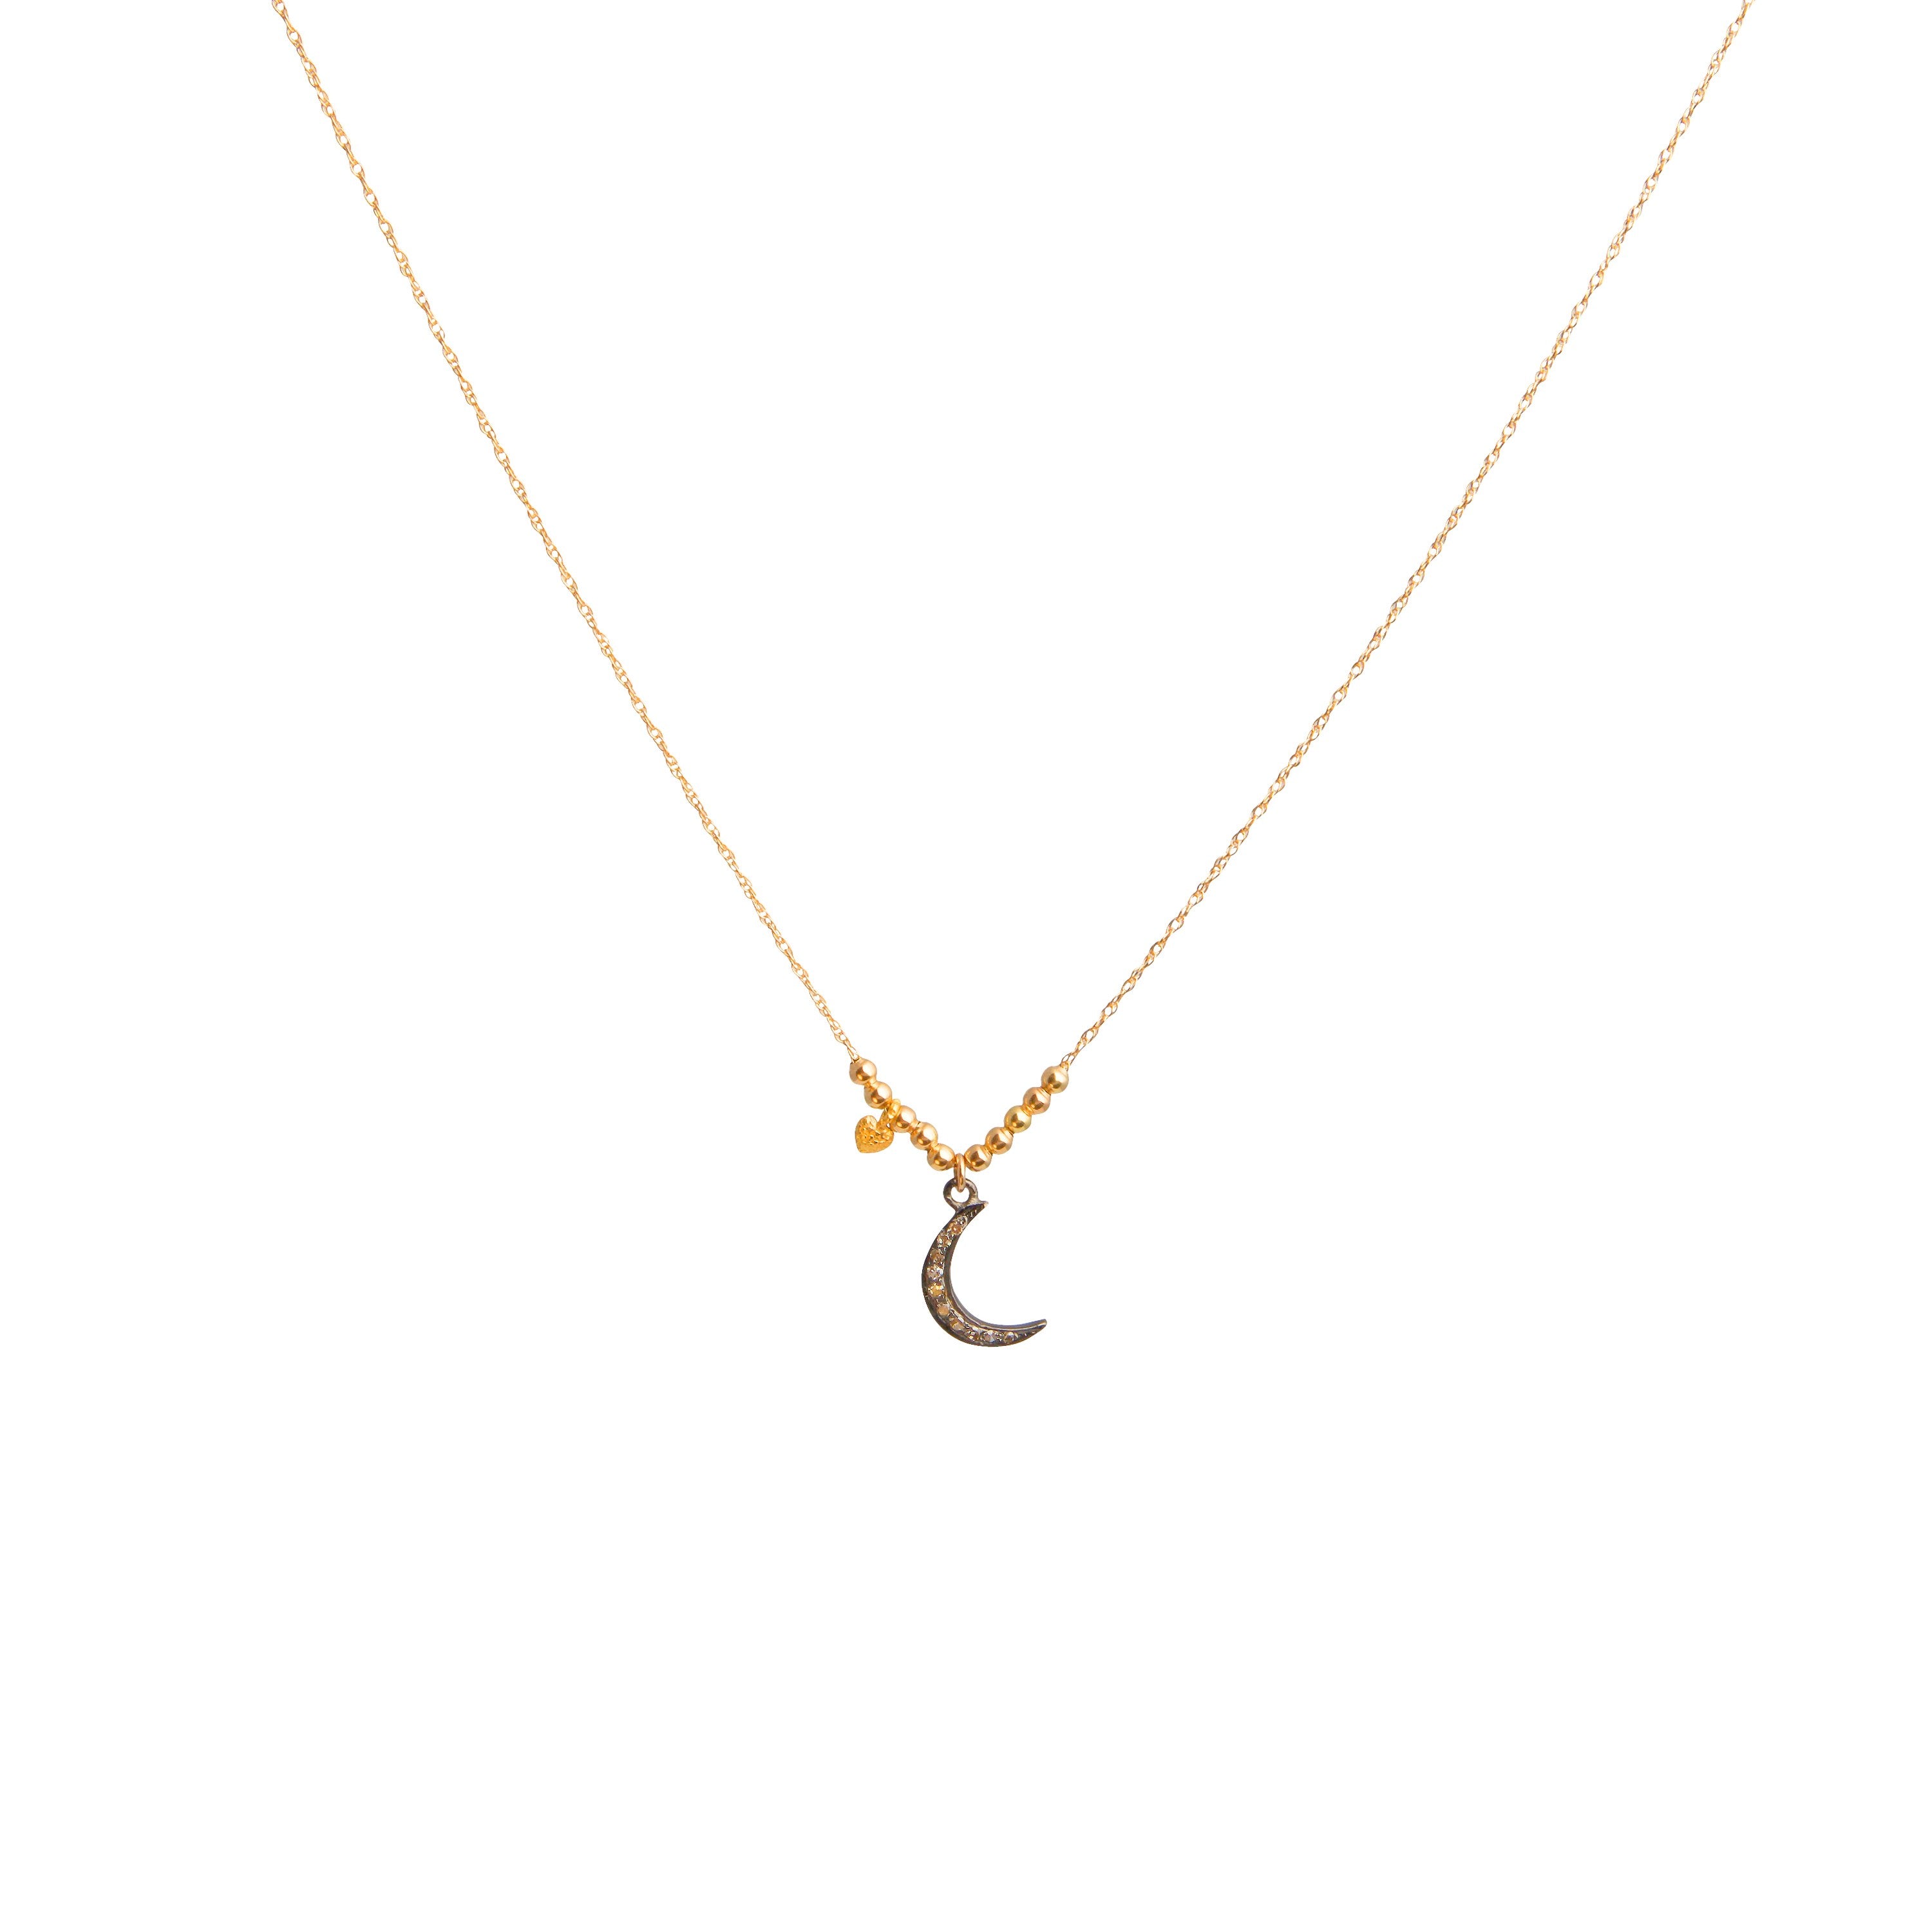 Crescent Moon and Gold Beads Necklace